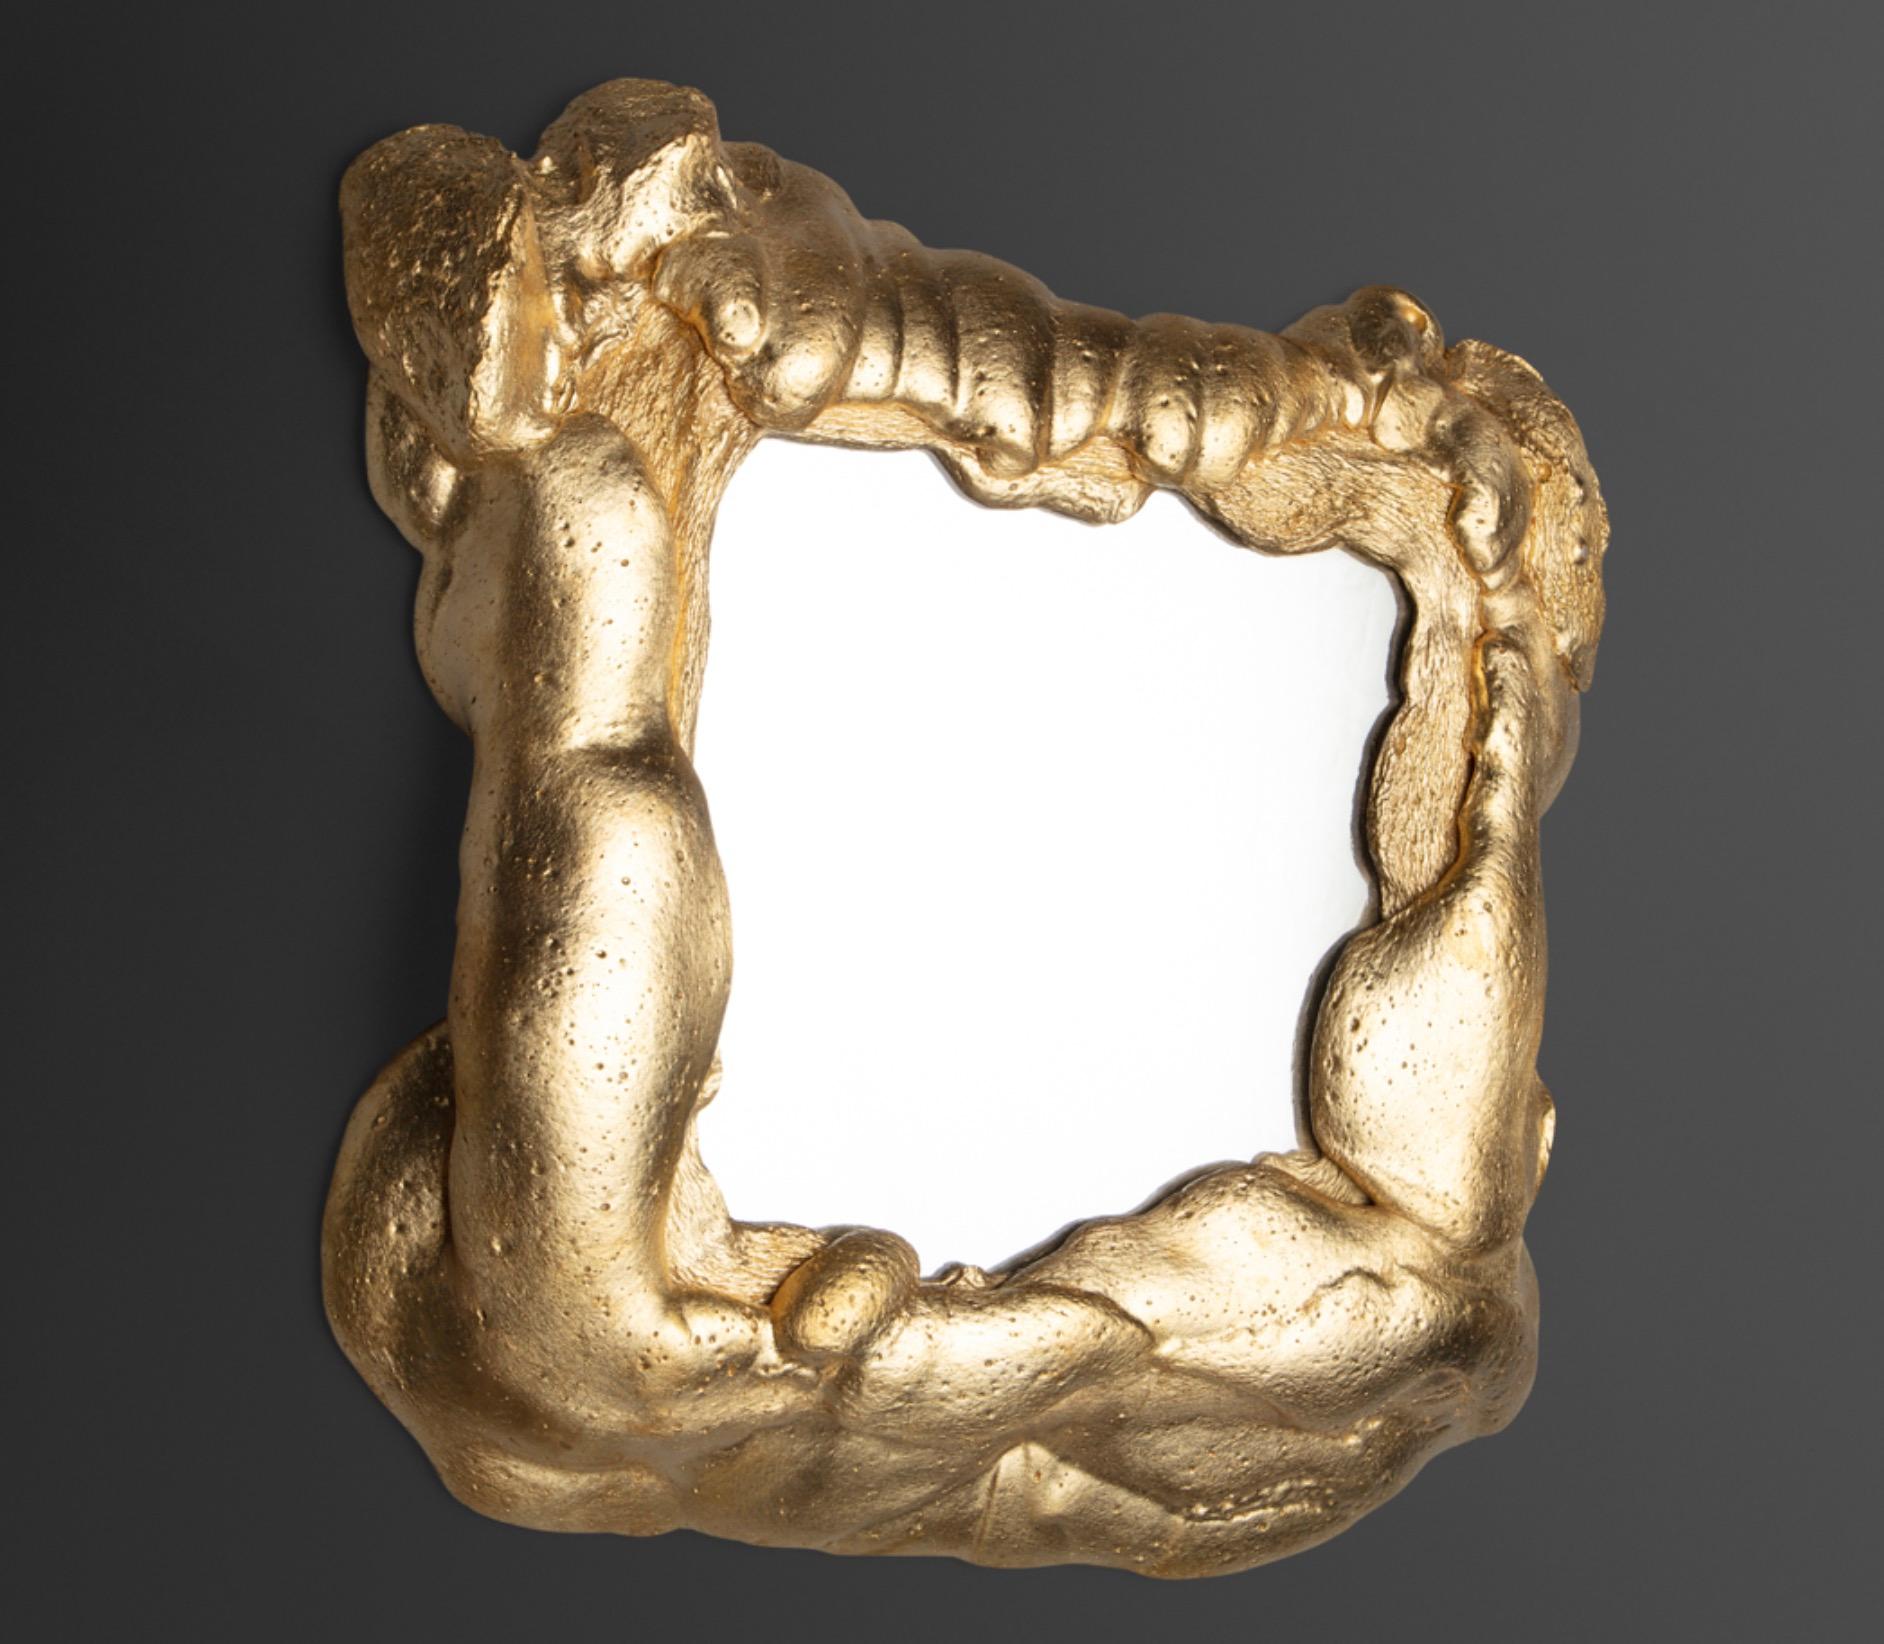 Yolande Milan Batteau (b. 1970)
USA, 2021
Brass gilded composite material with a mirror plate. 
Height: 25” Width: 26” Depth: 3.5”